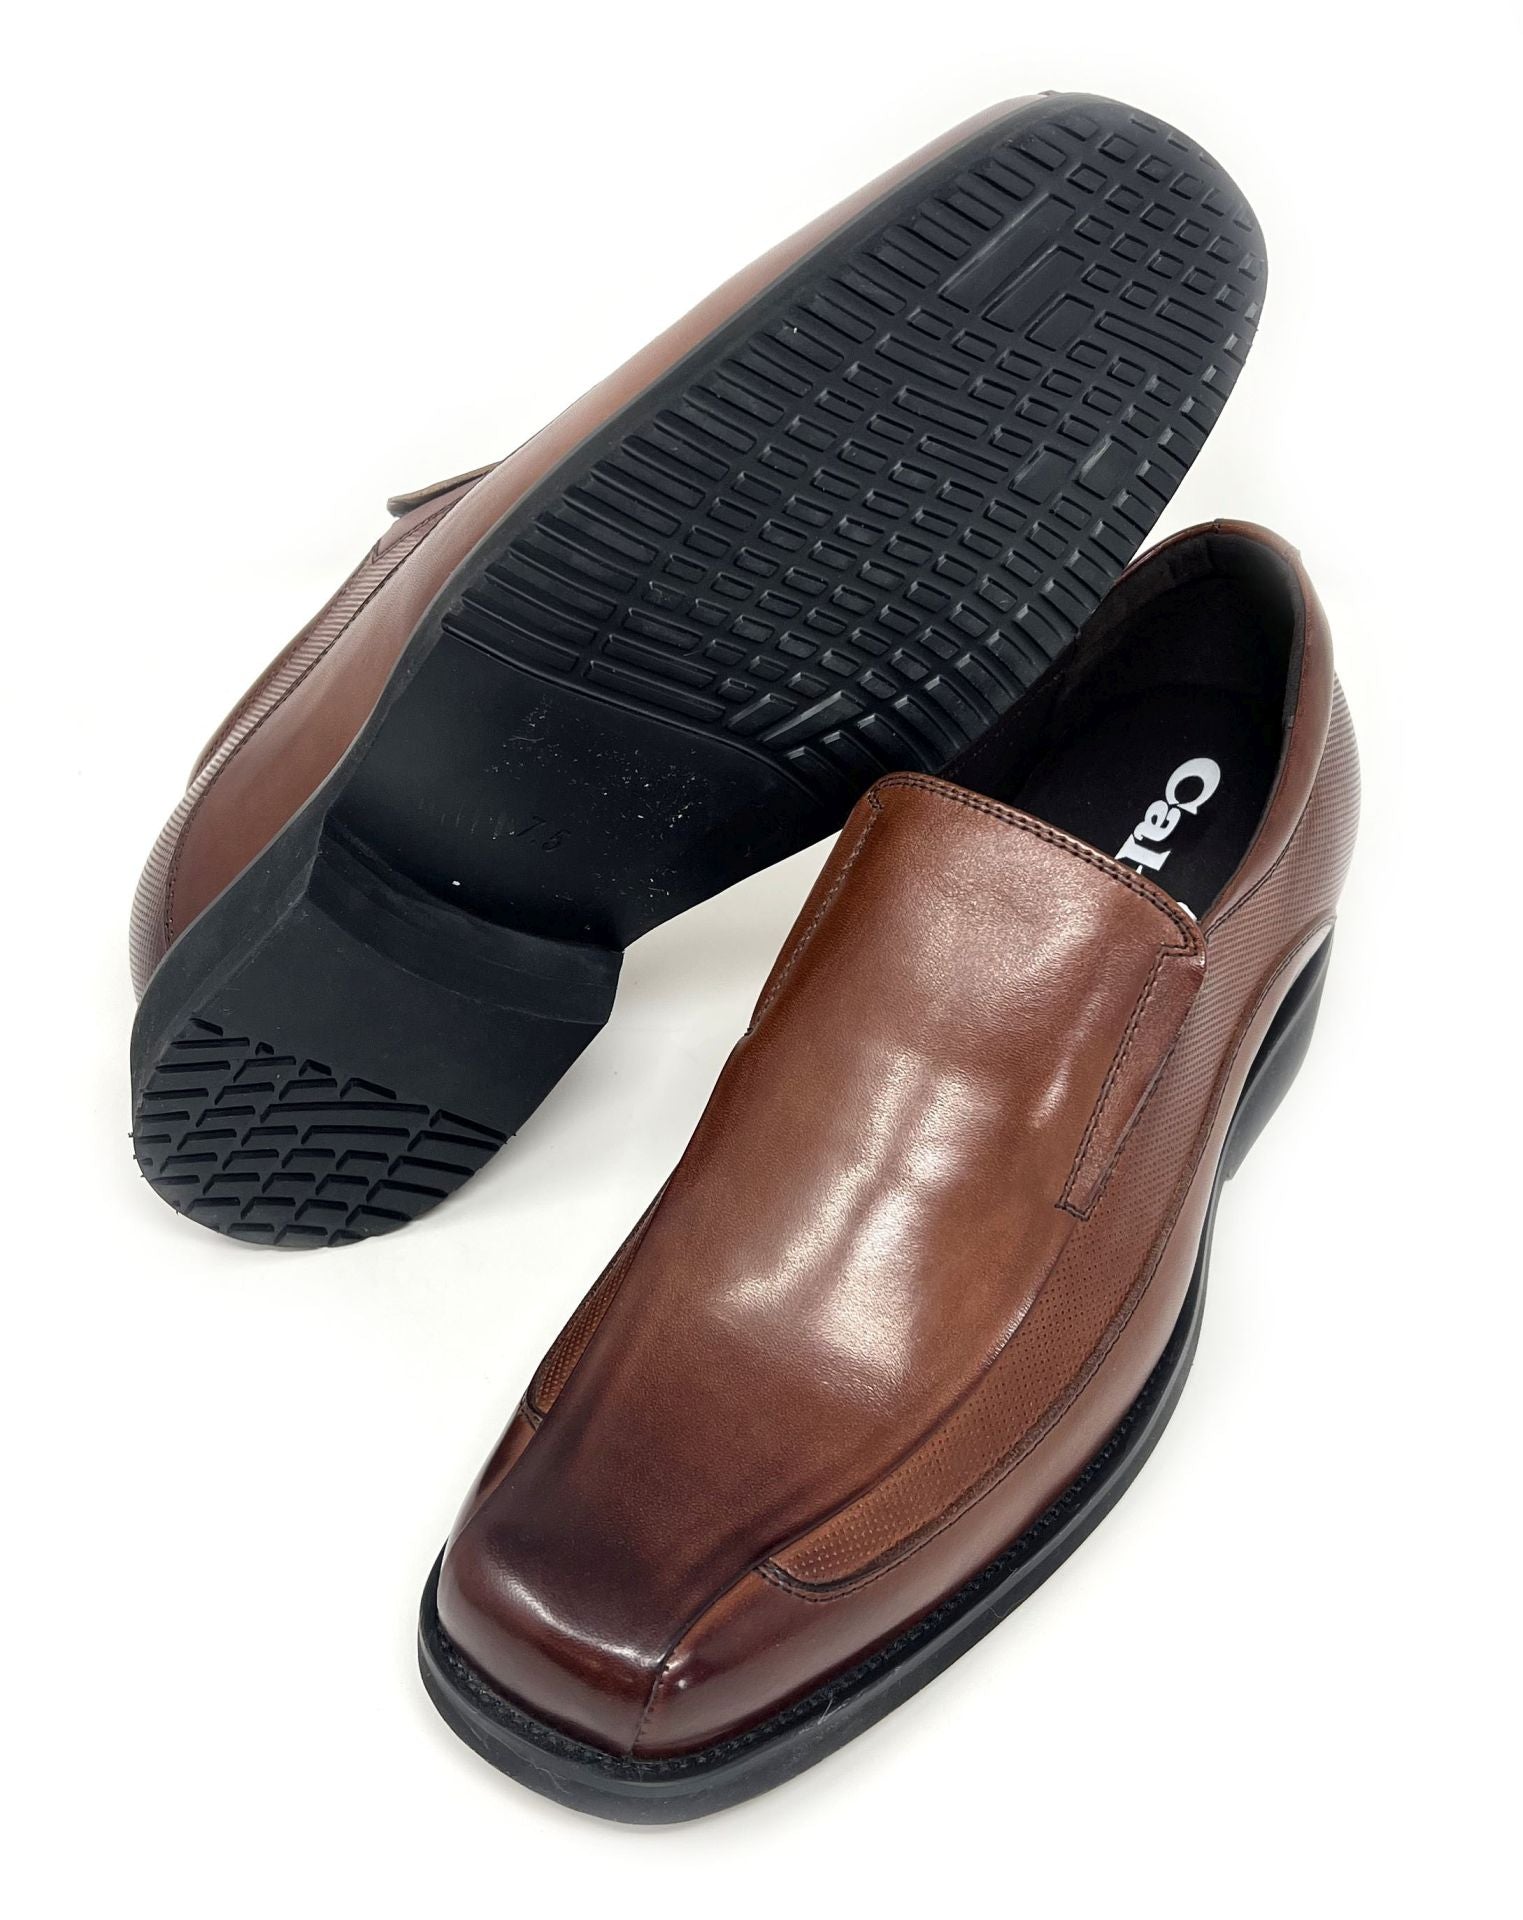 Elevator shoes height increase FSP0061 - 2.8 Inches Taller (Coffee) - Size 7.5 Only